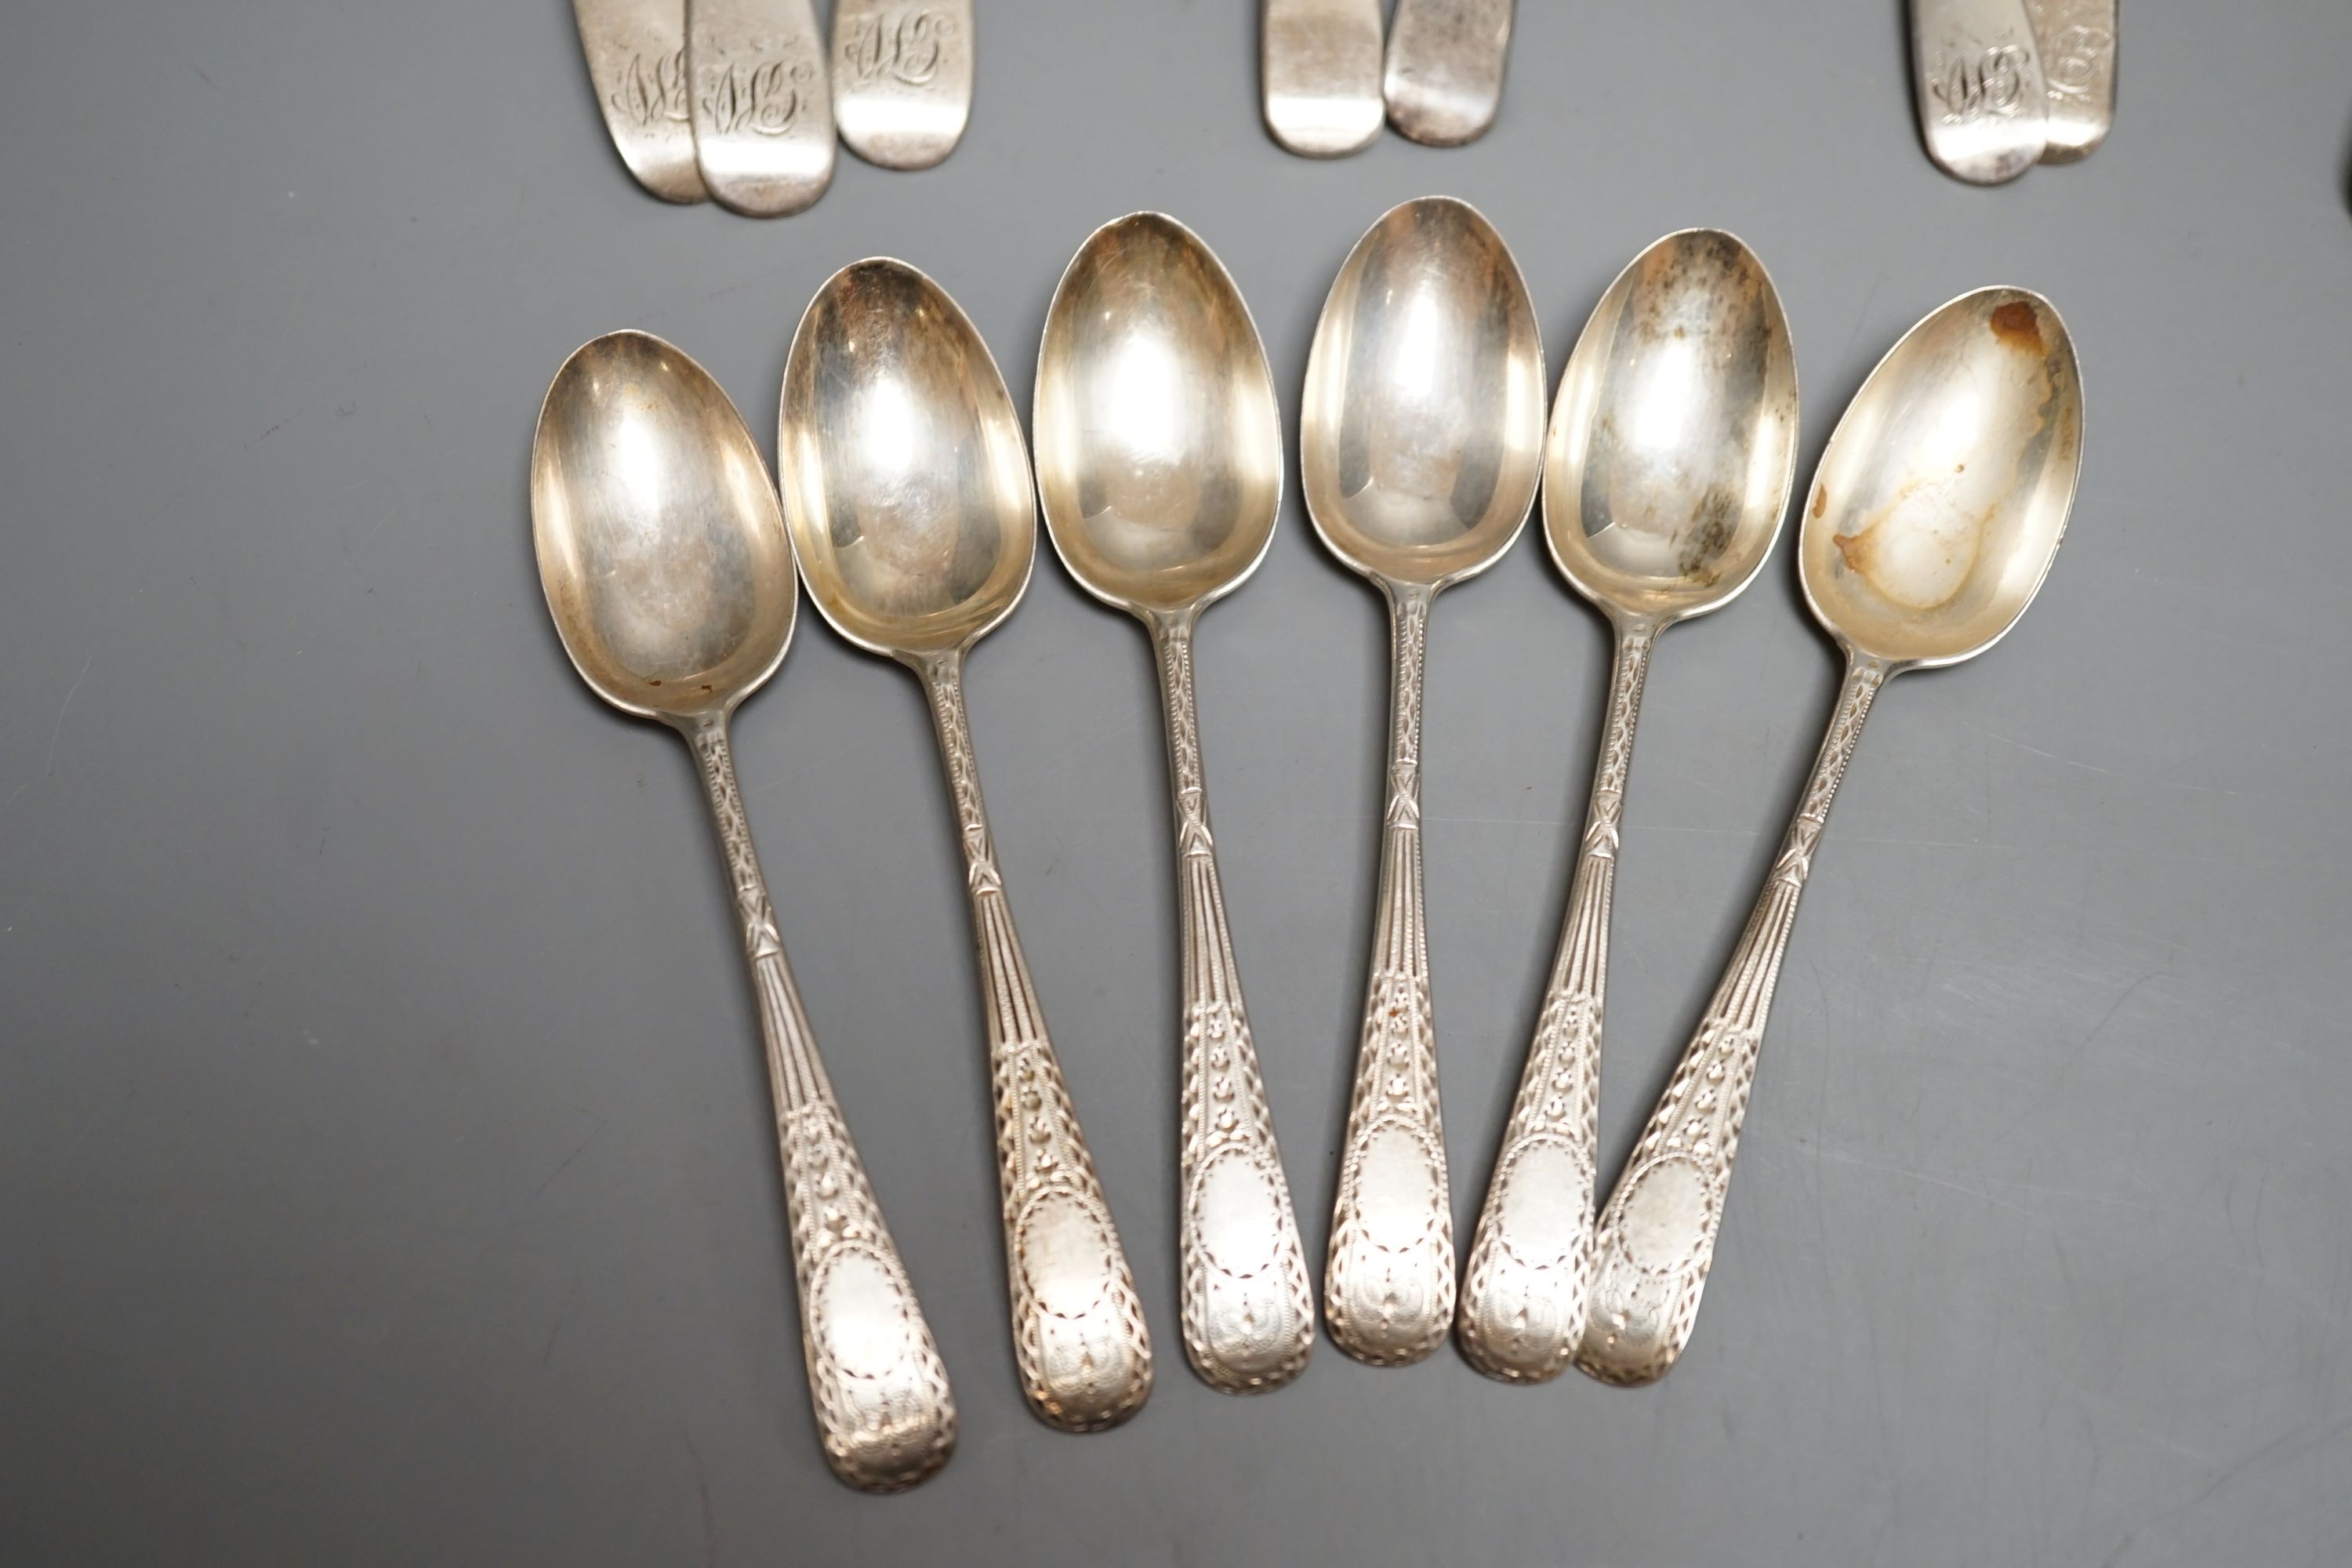 A quantity of silver teaspoons, sifter spoons and condiment spoons, including a set of six coffee spoons, London, 1899